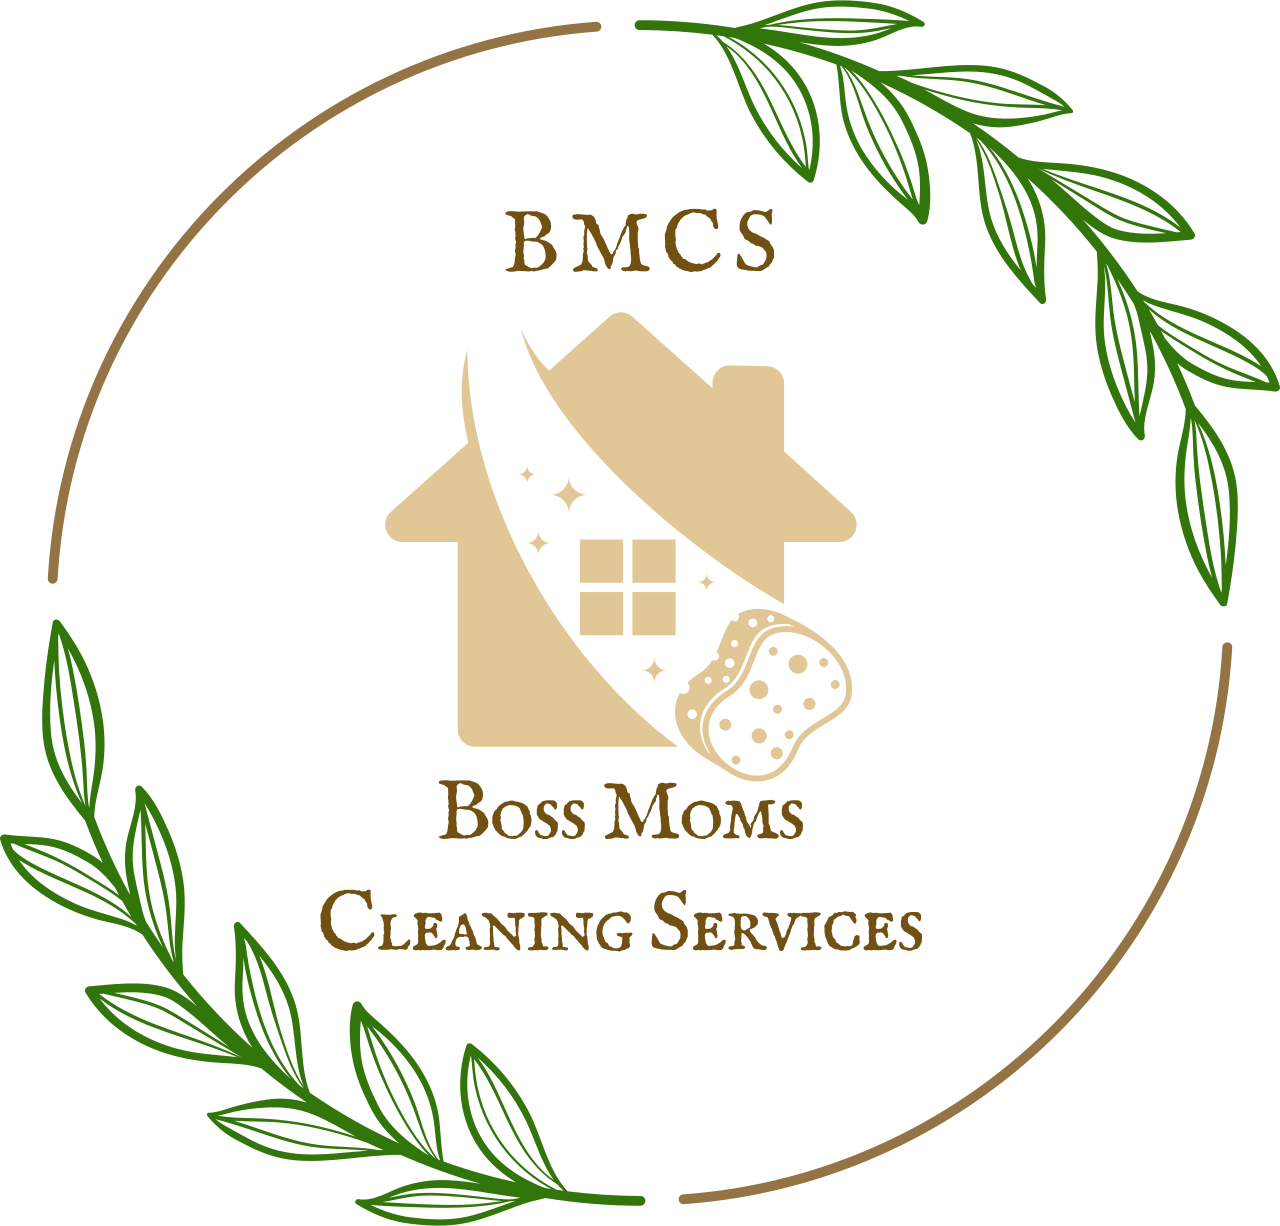 Boss Moms
Cleaning Services's logo